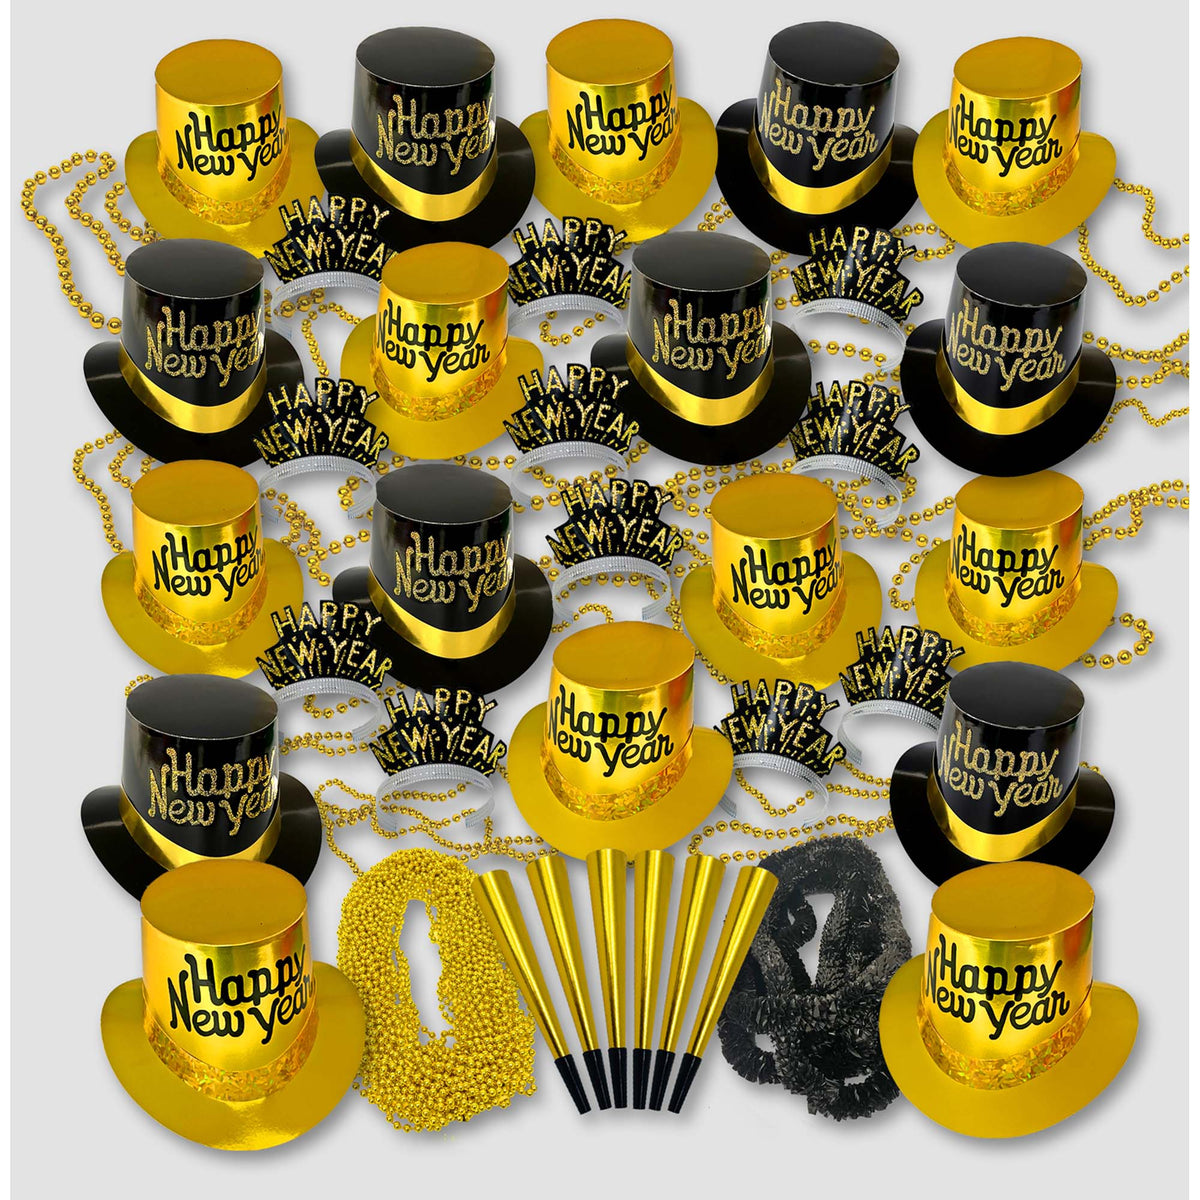 PARTY TIME MFG New Year Happy New Year Gold Party Kit for 200 People, 1 Count 010372820991